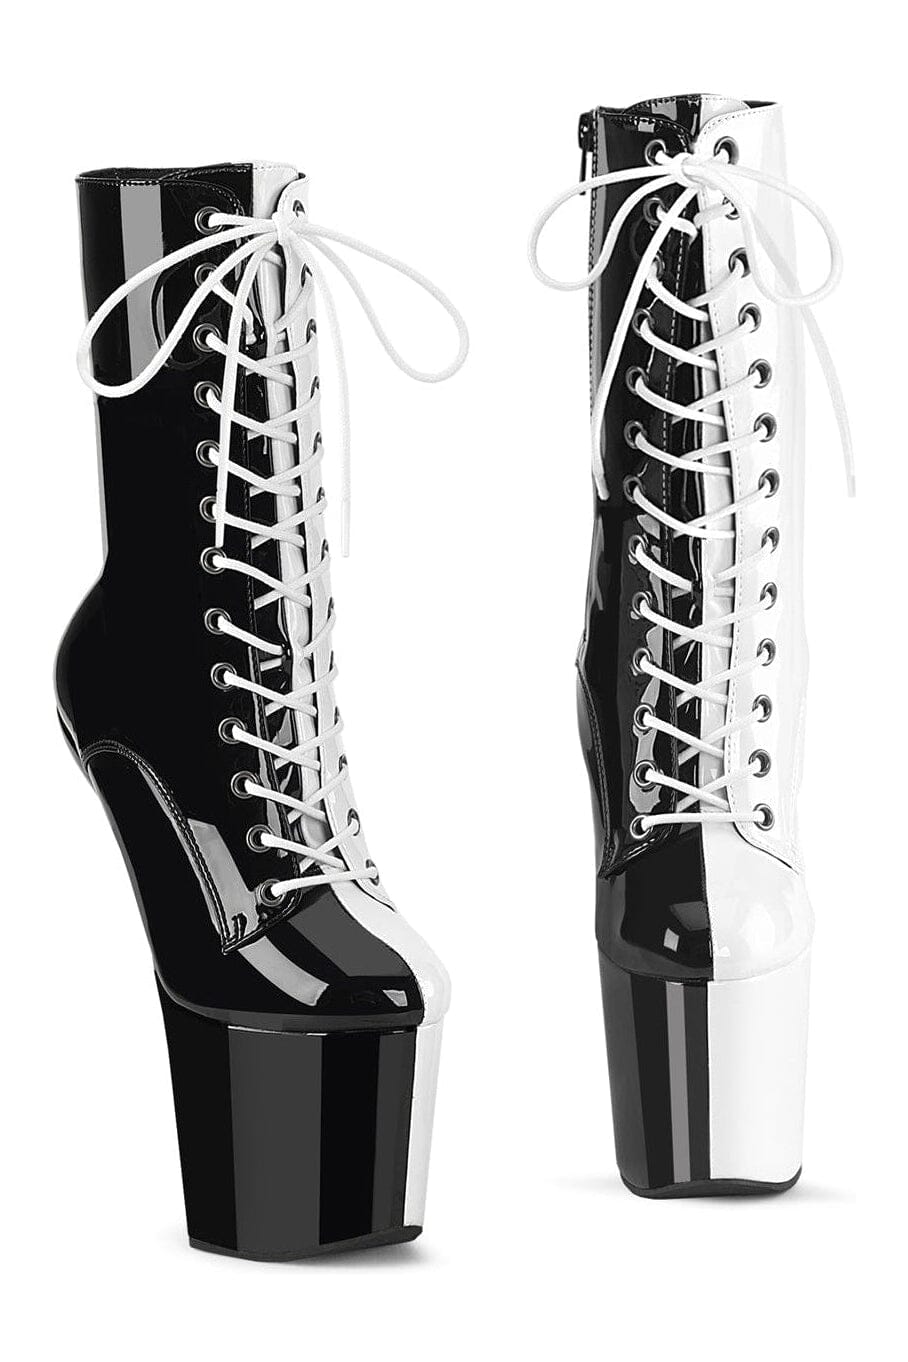 CRAZE-1040TT Black Patent Ankle Boot-Ankle Boots- Stripper Shoes at SEXYSHOES.COM